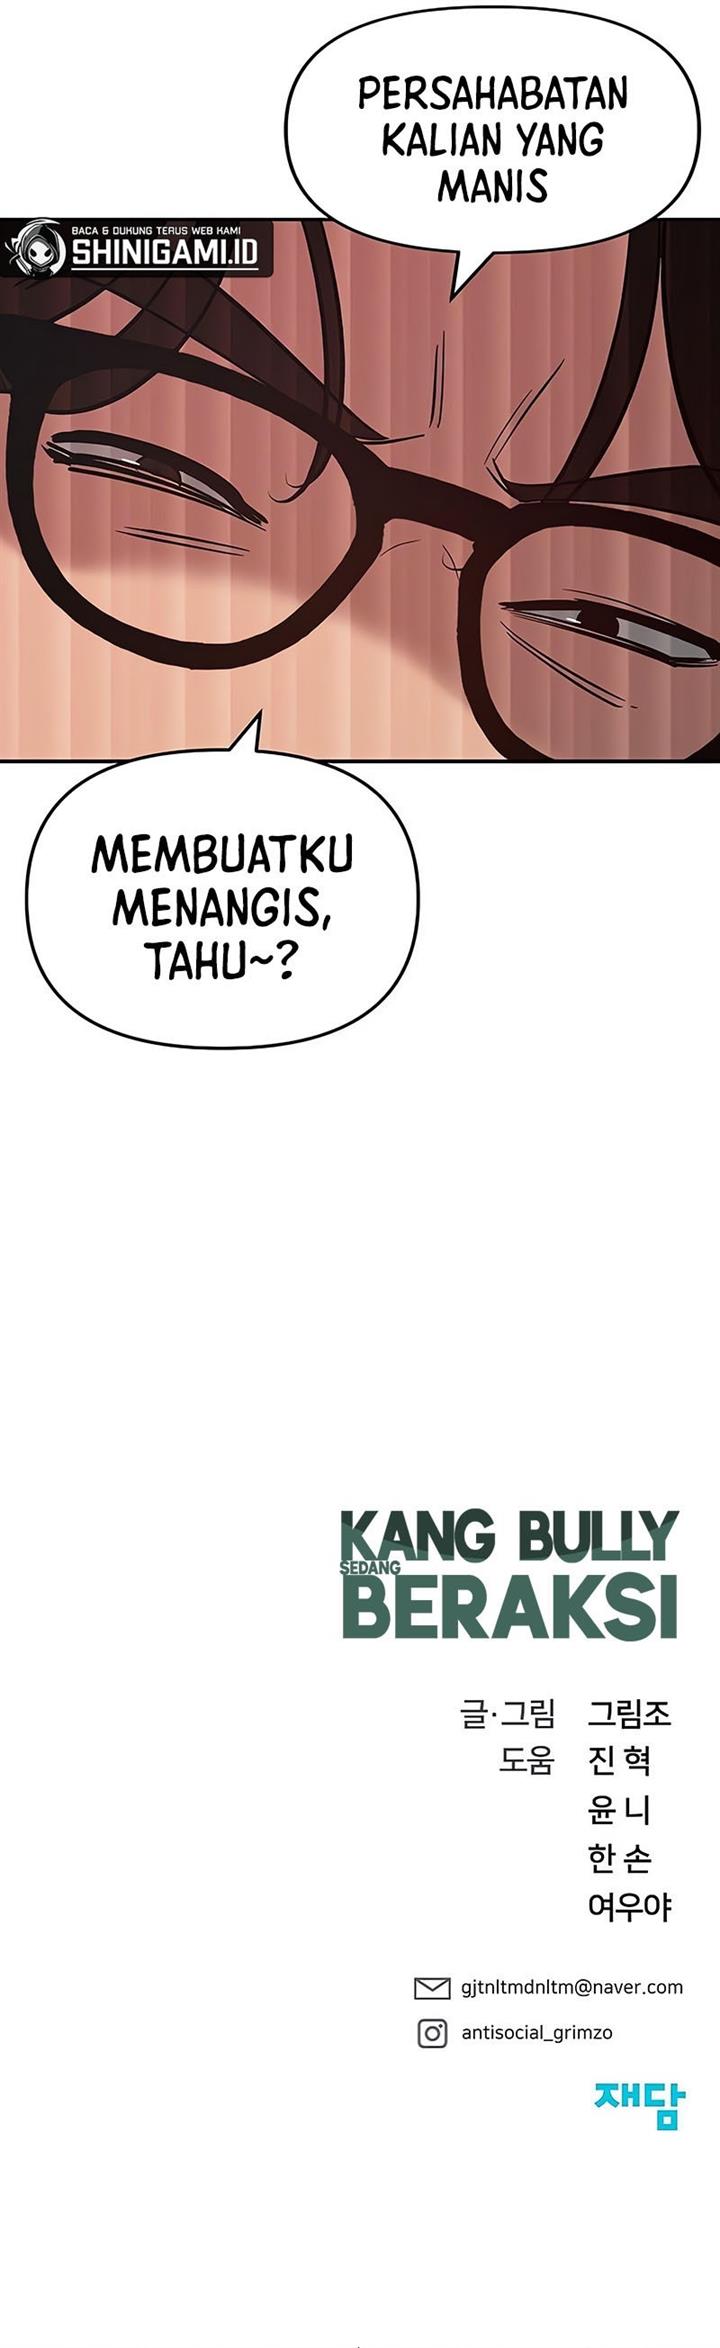 The Bully In Charge Chapter 54